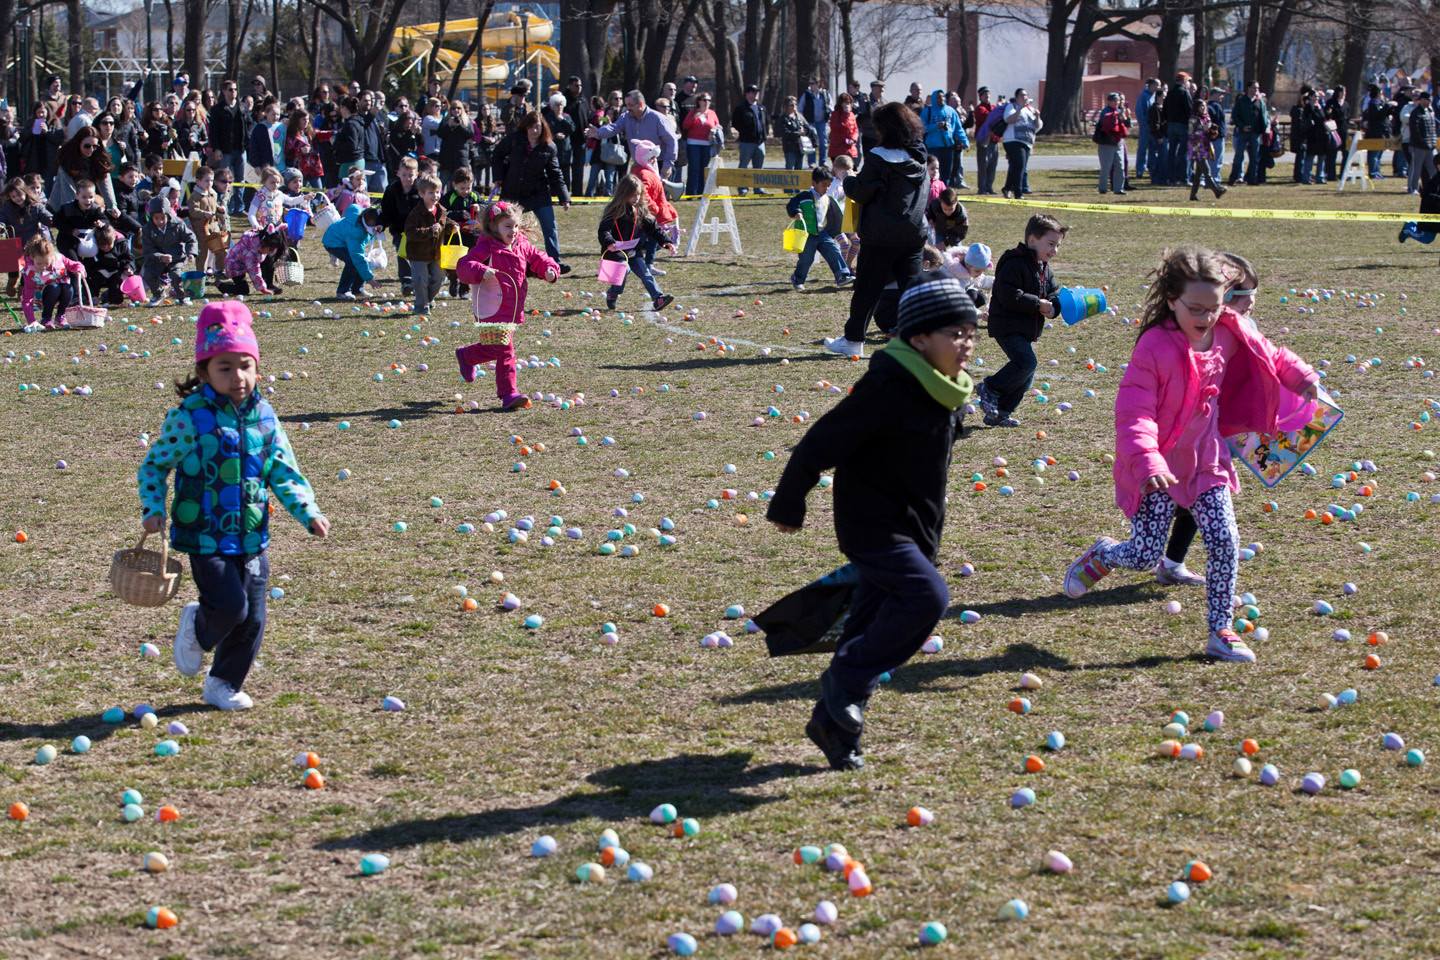 Children raced to collect the most eggs in Greis Park.